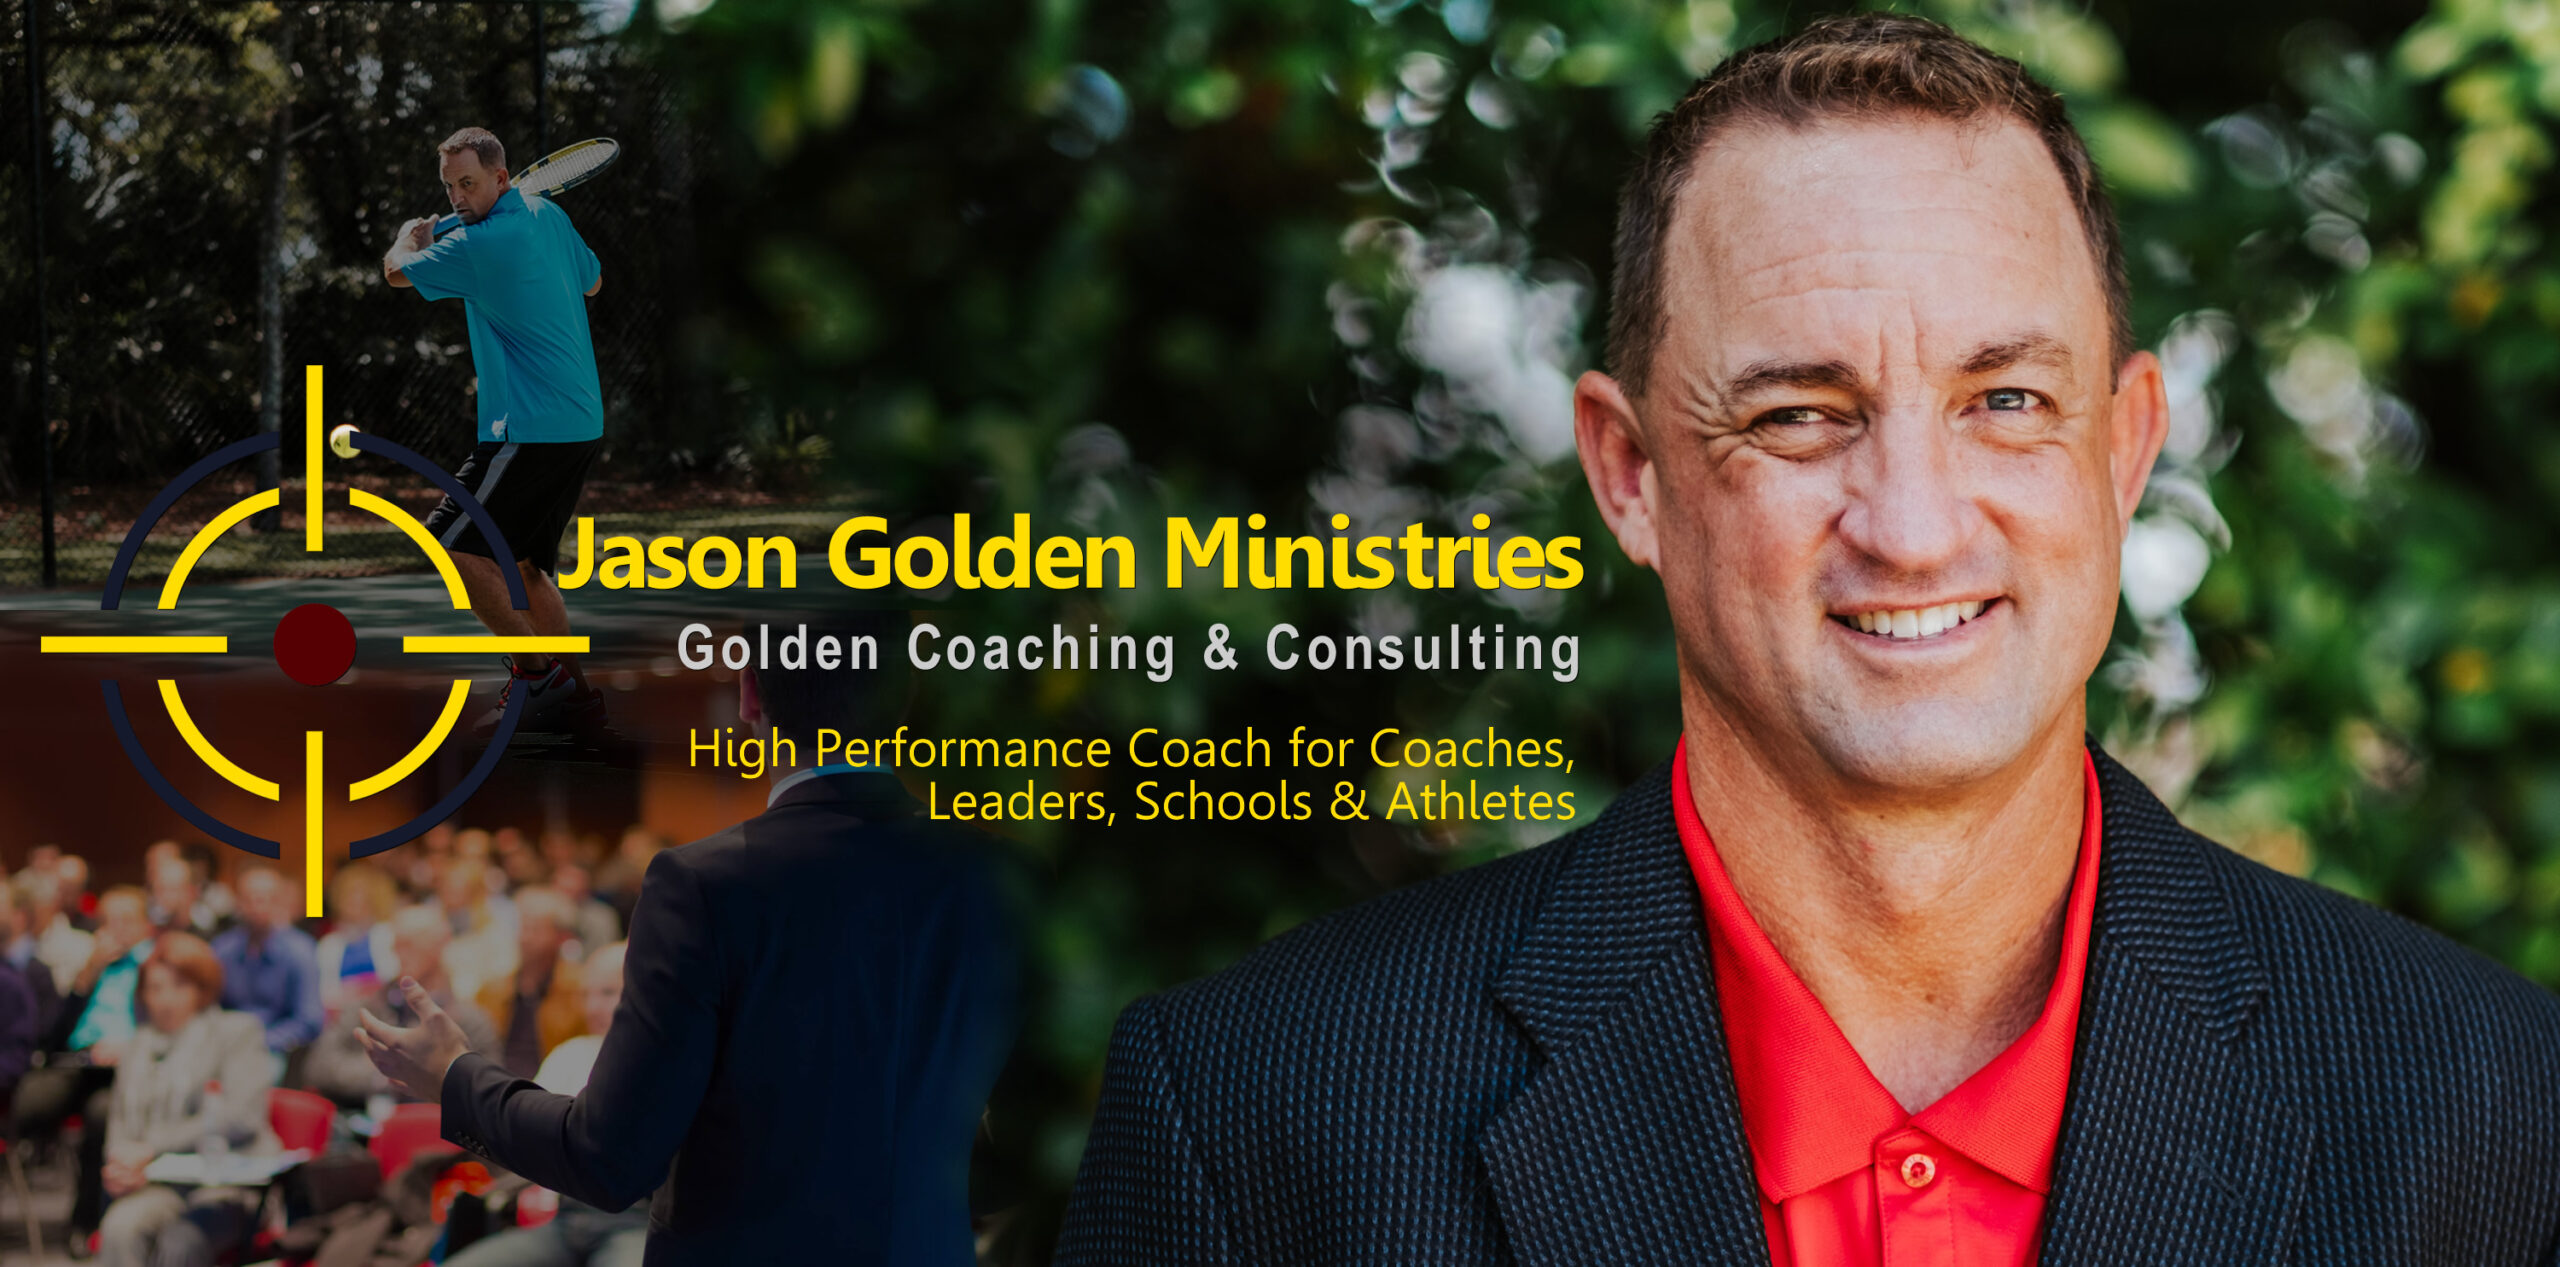 High Performance Coach for Coaches, Leaders, Schools & Athletes